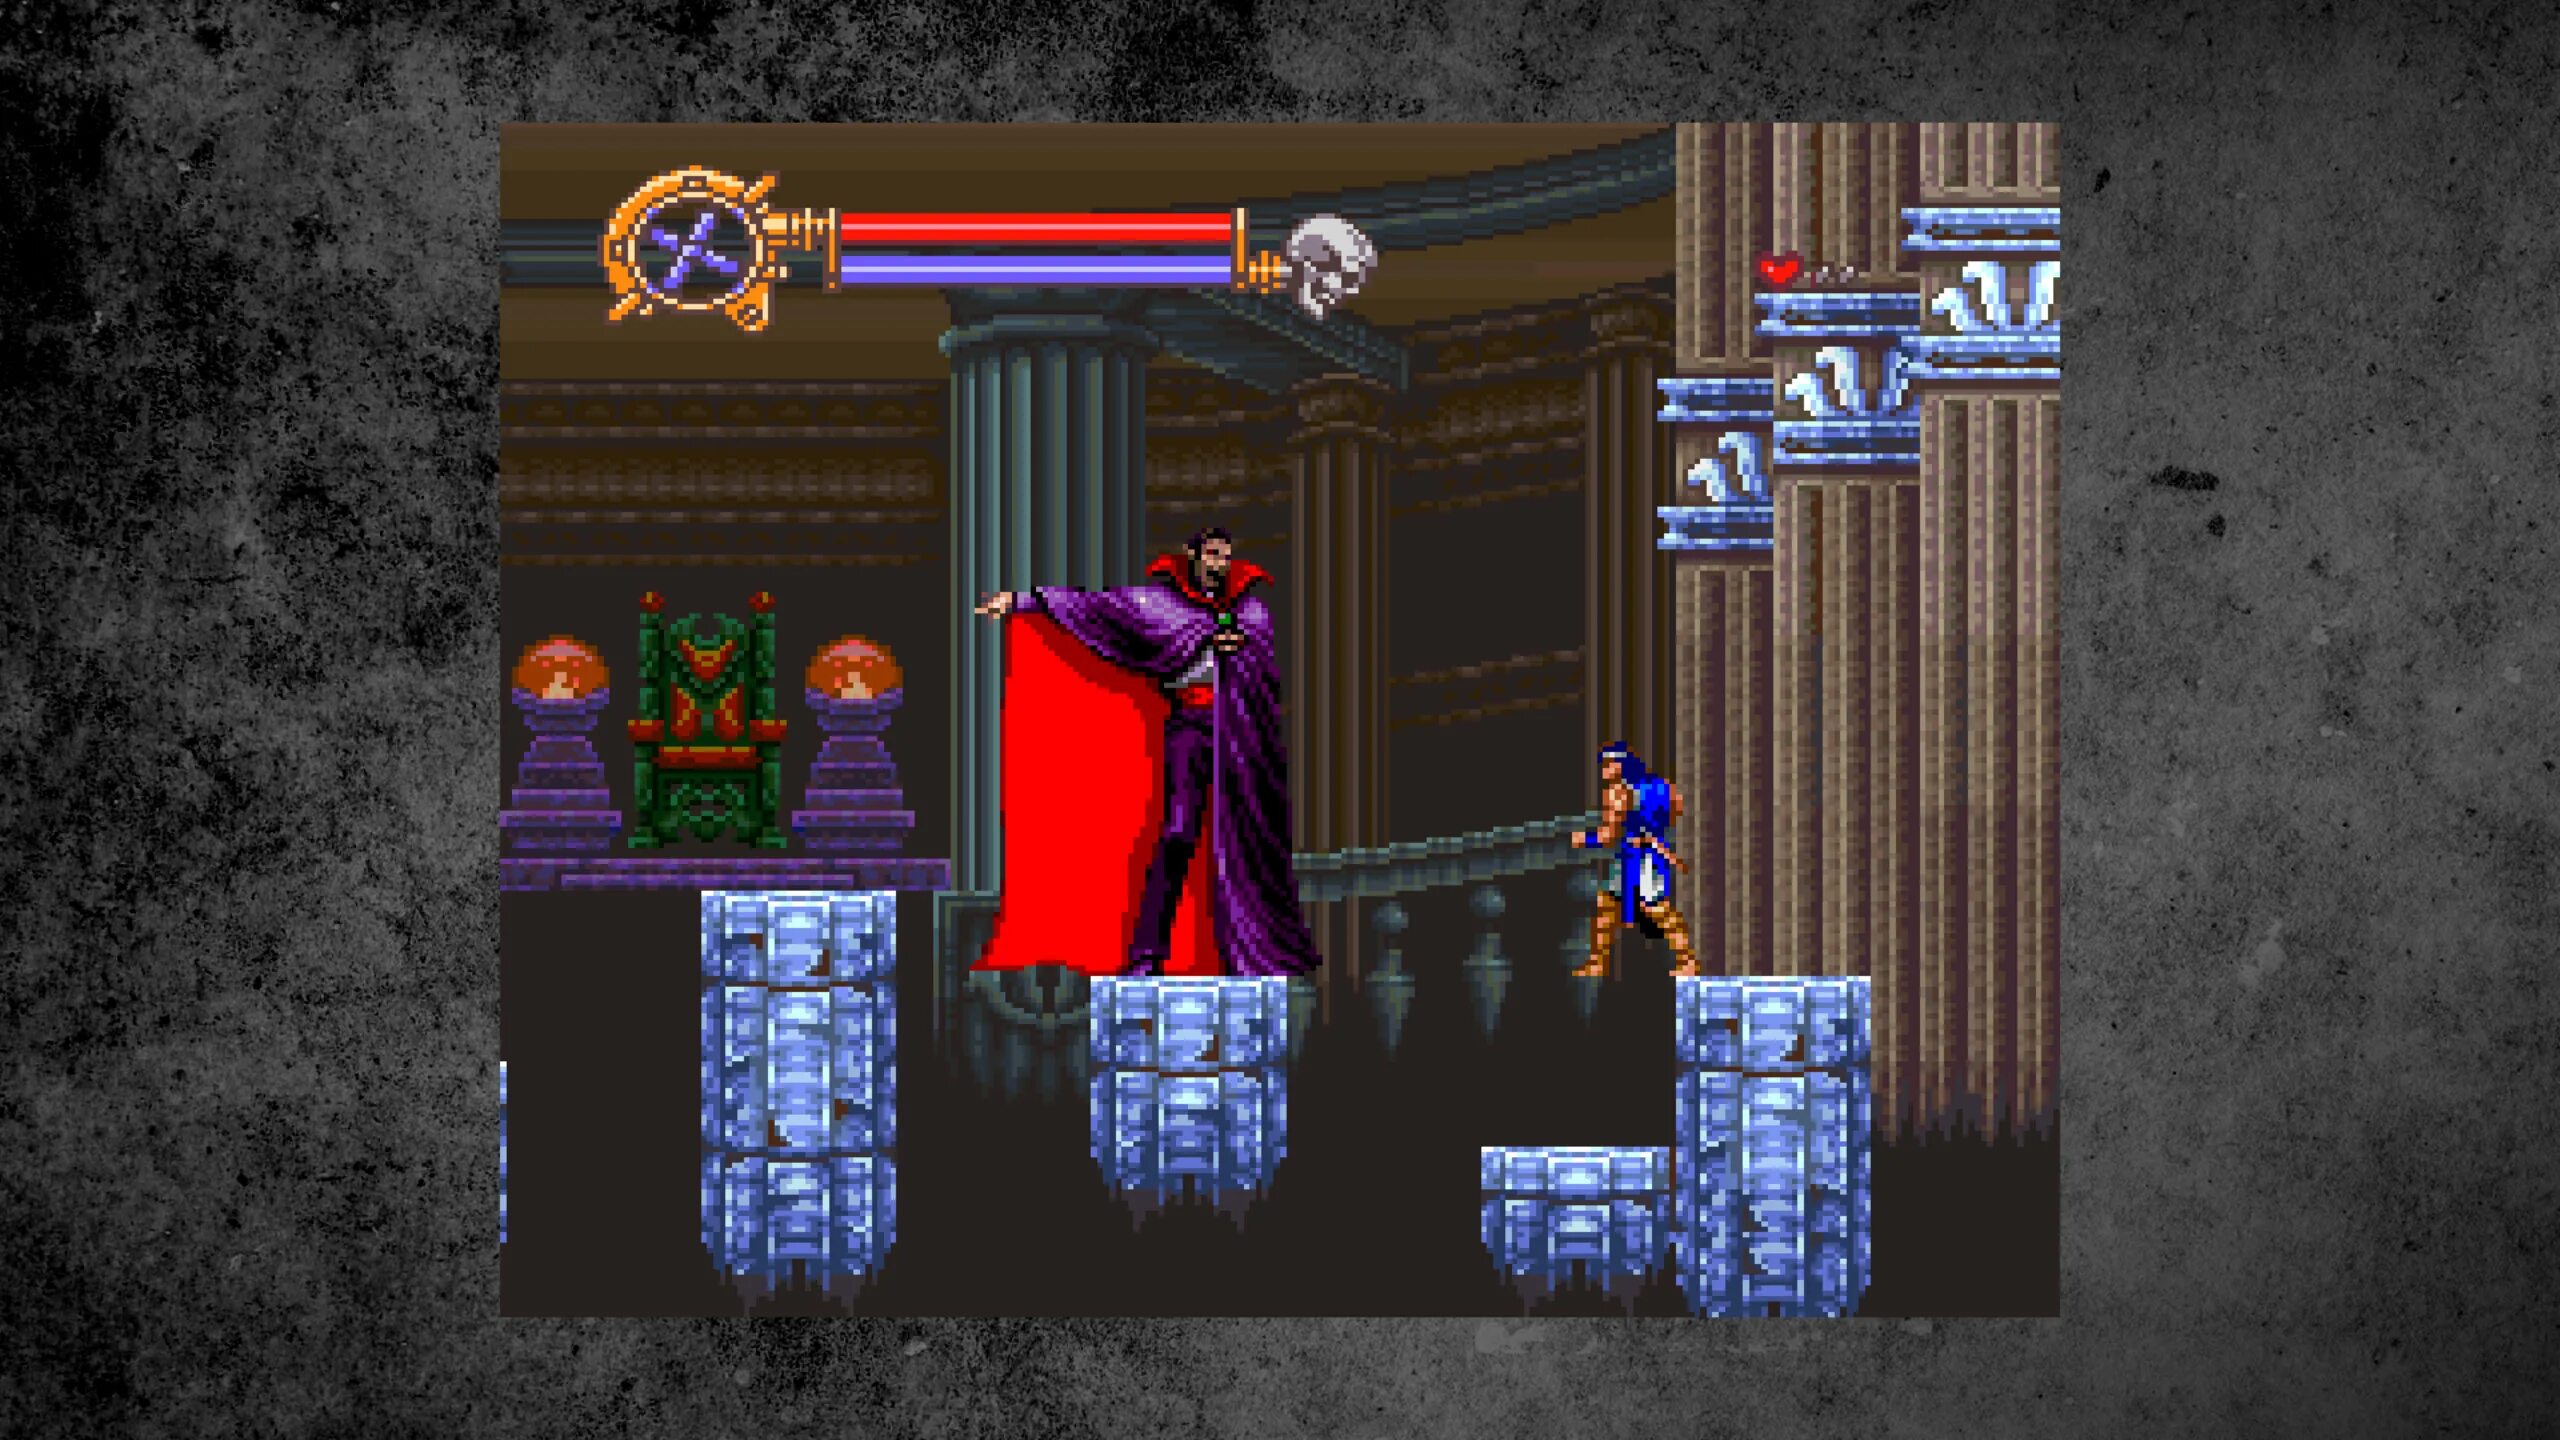 Castlevania игра 2003. Castlevania игра 2021. Castlevania Dracula x Snes буквы. Castlevania advance collection